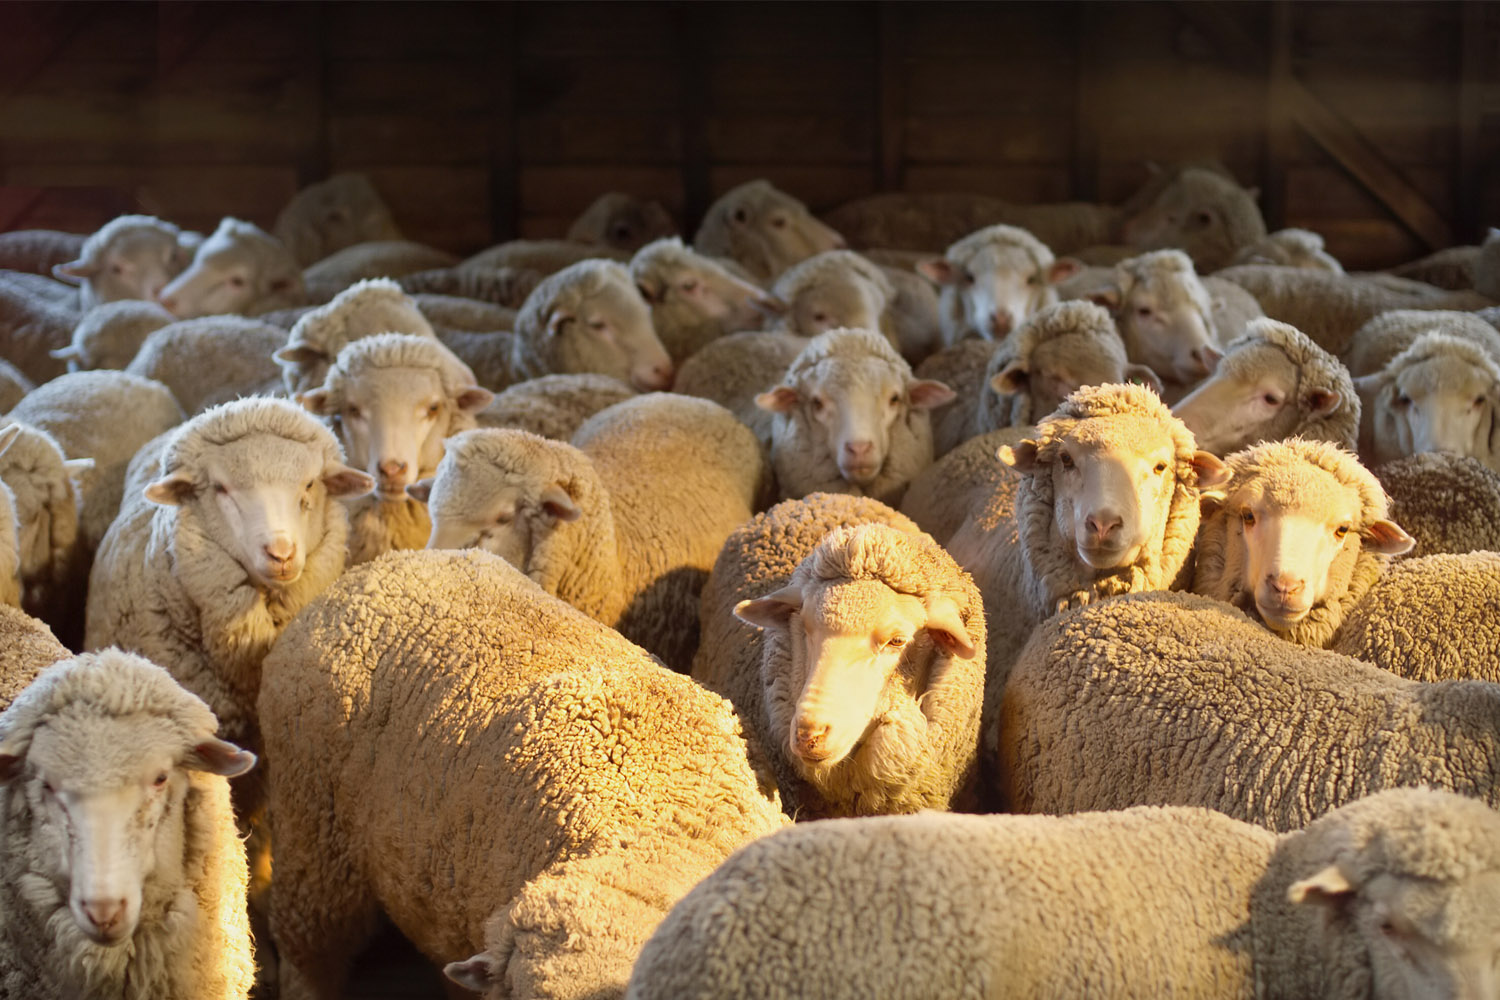 Sheep in shed.